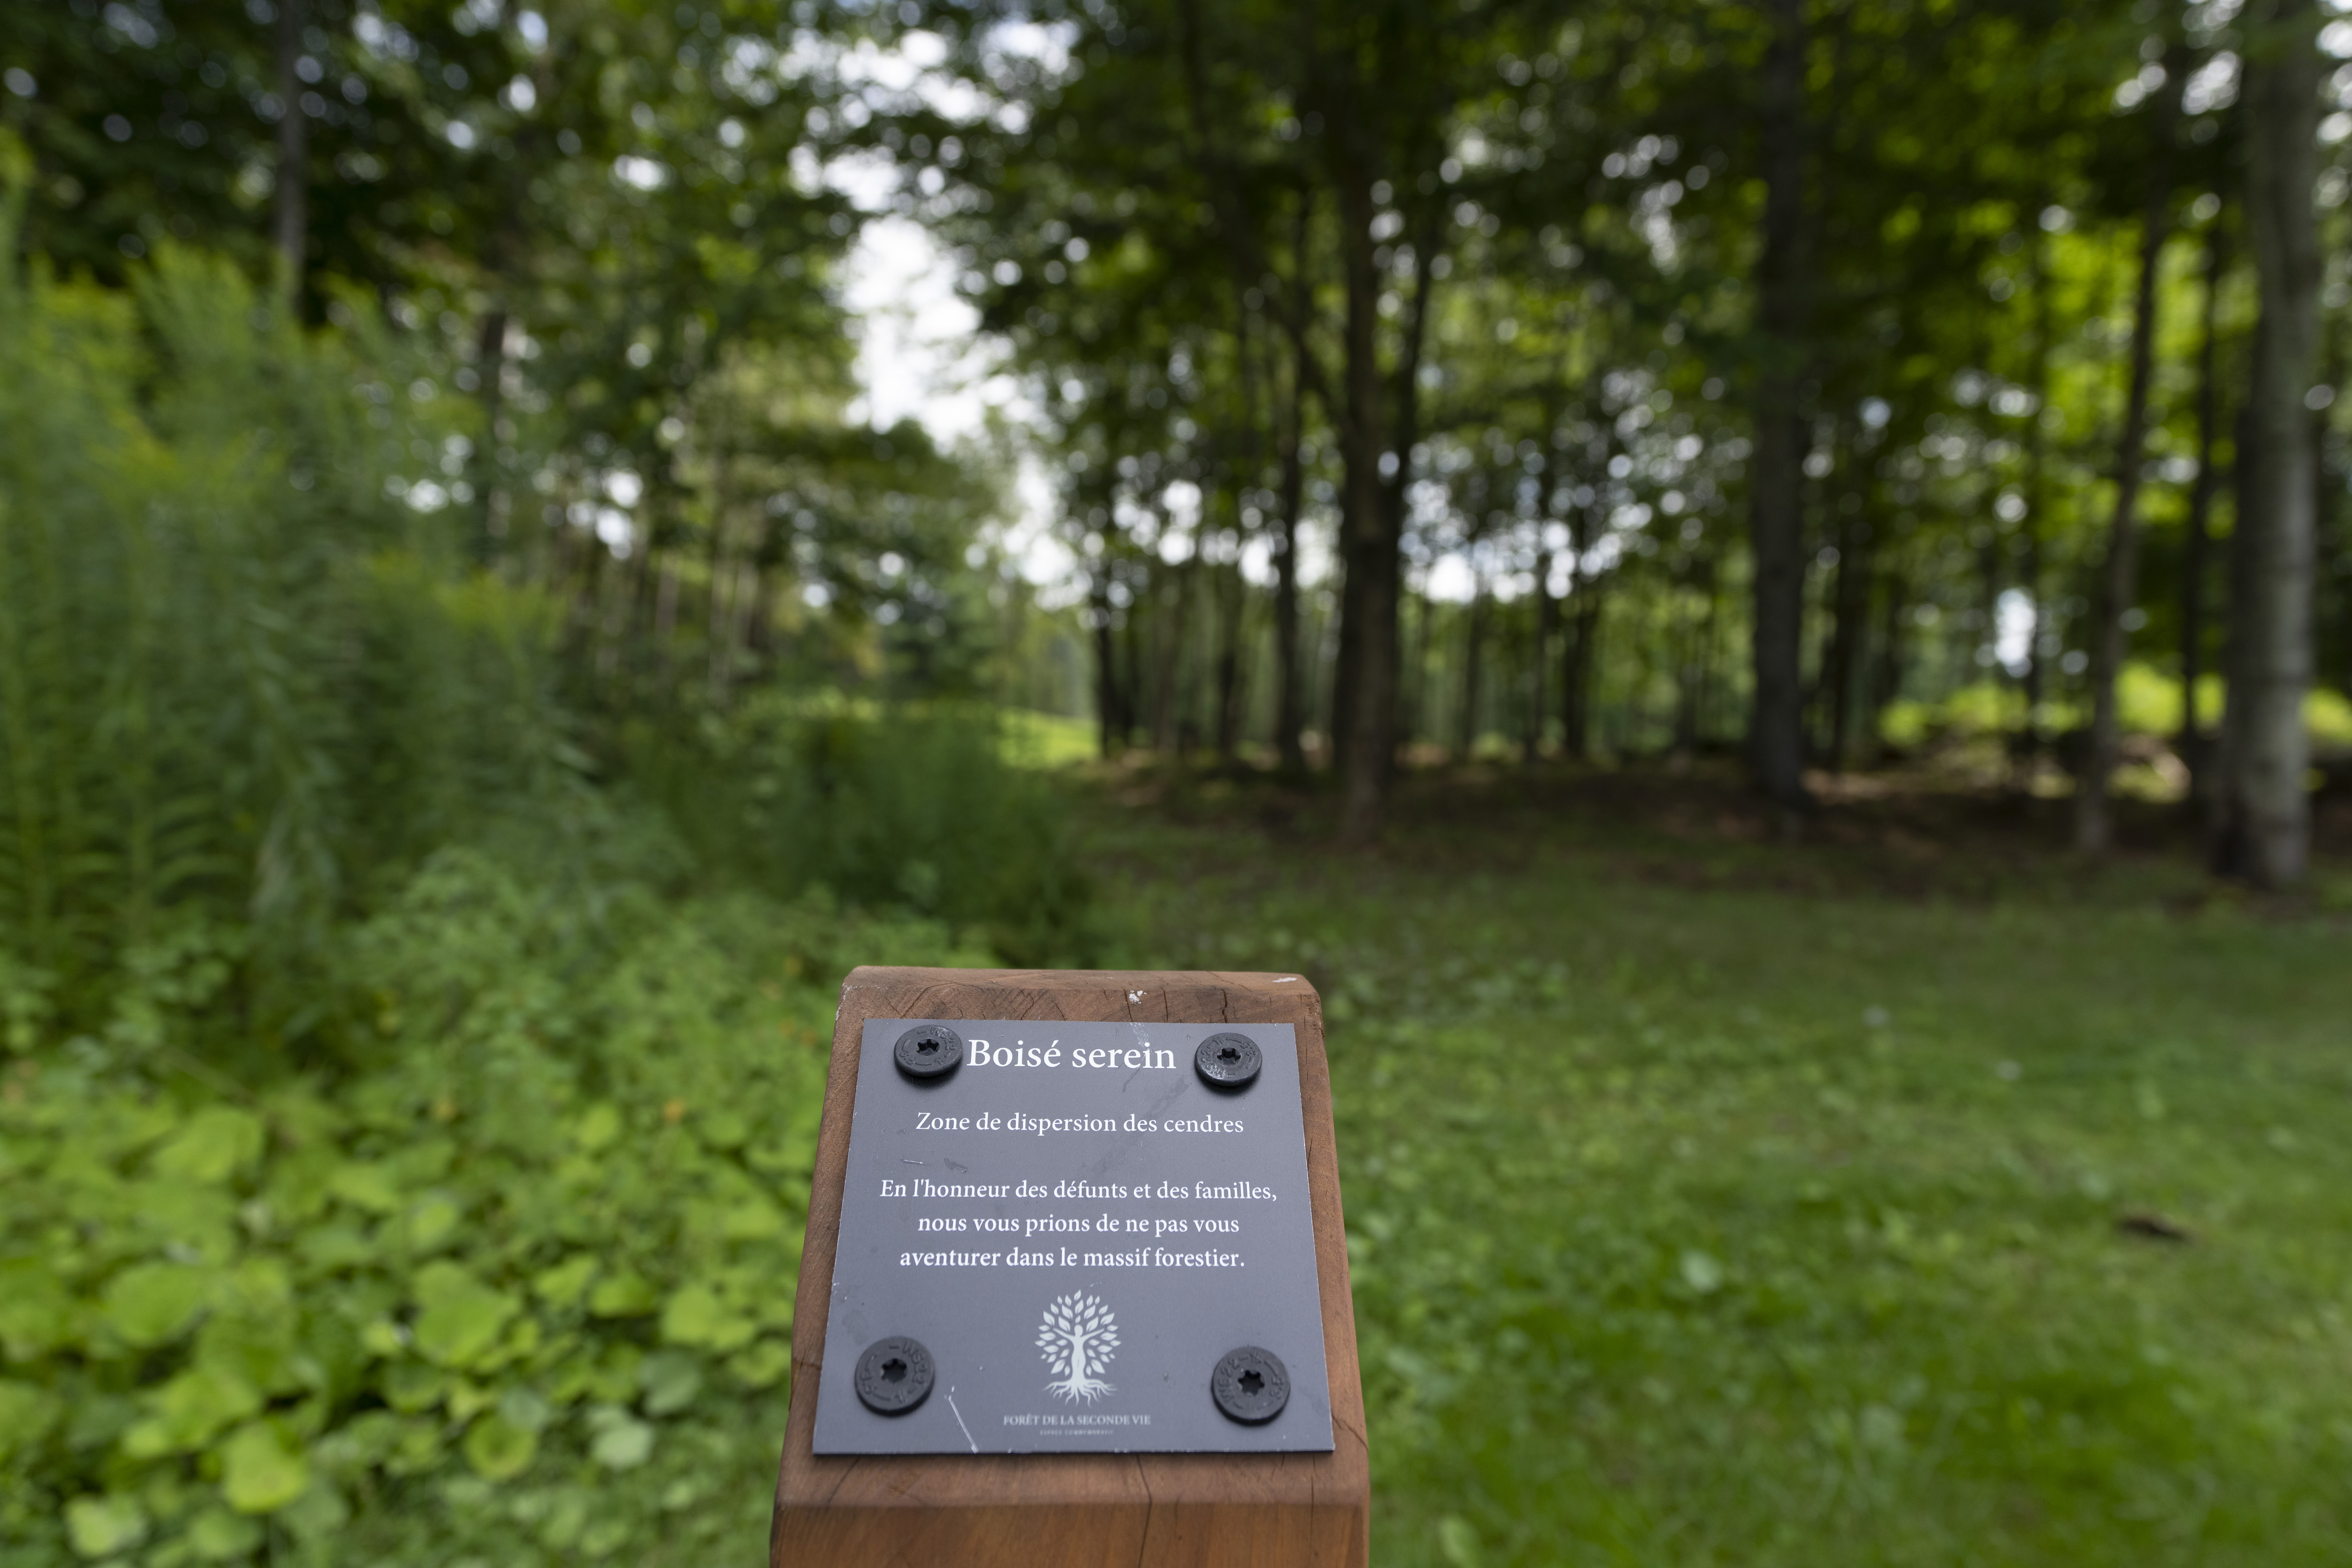 Quebec cemetery turns former golf course into forest for the deceased